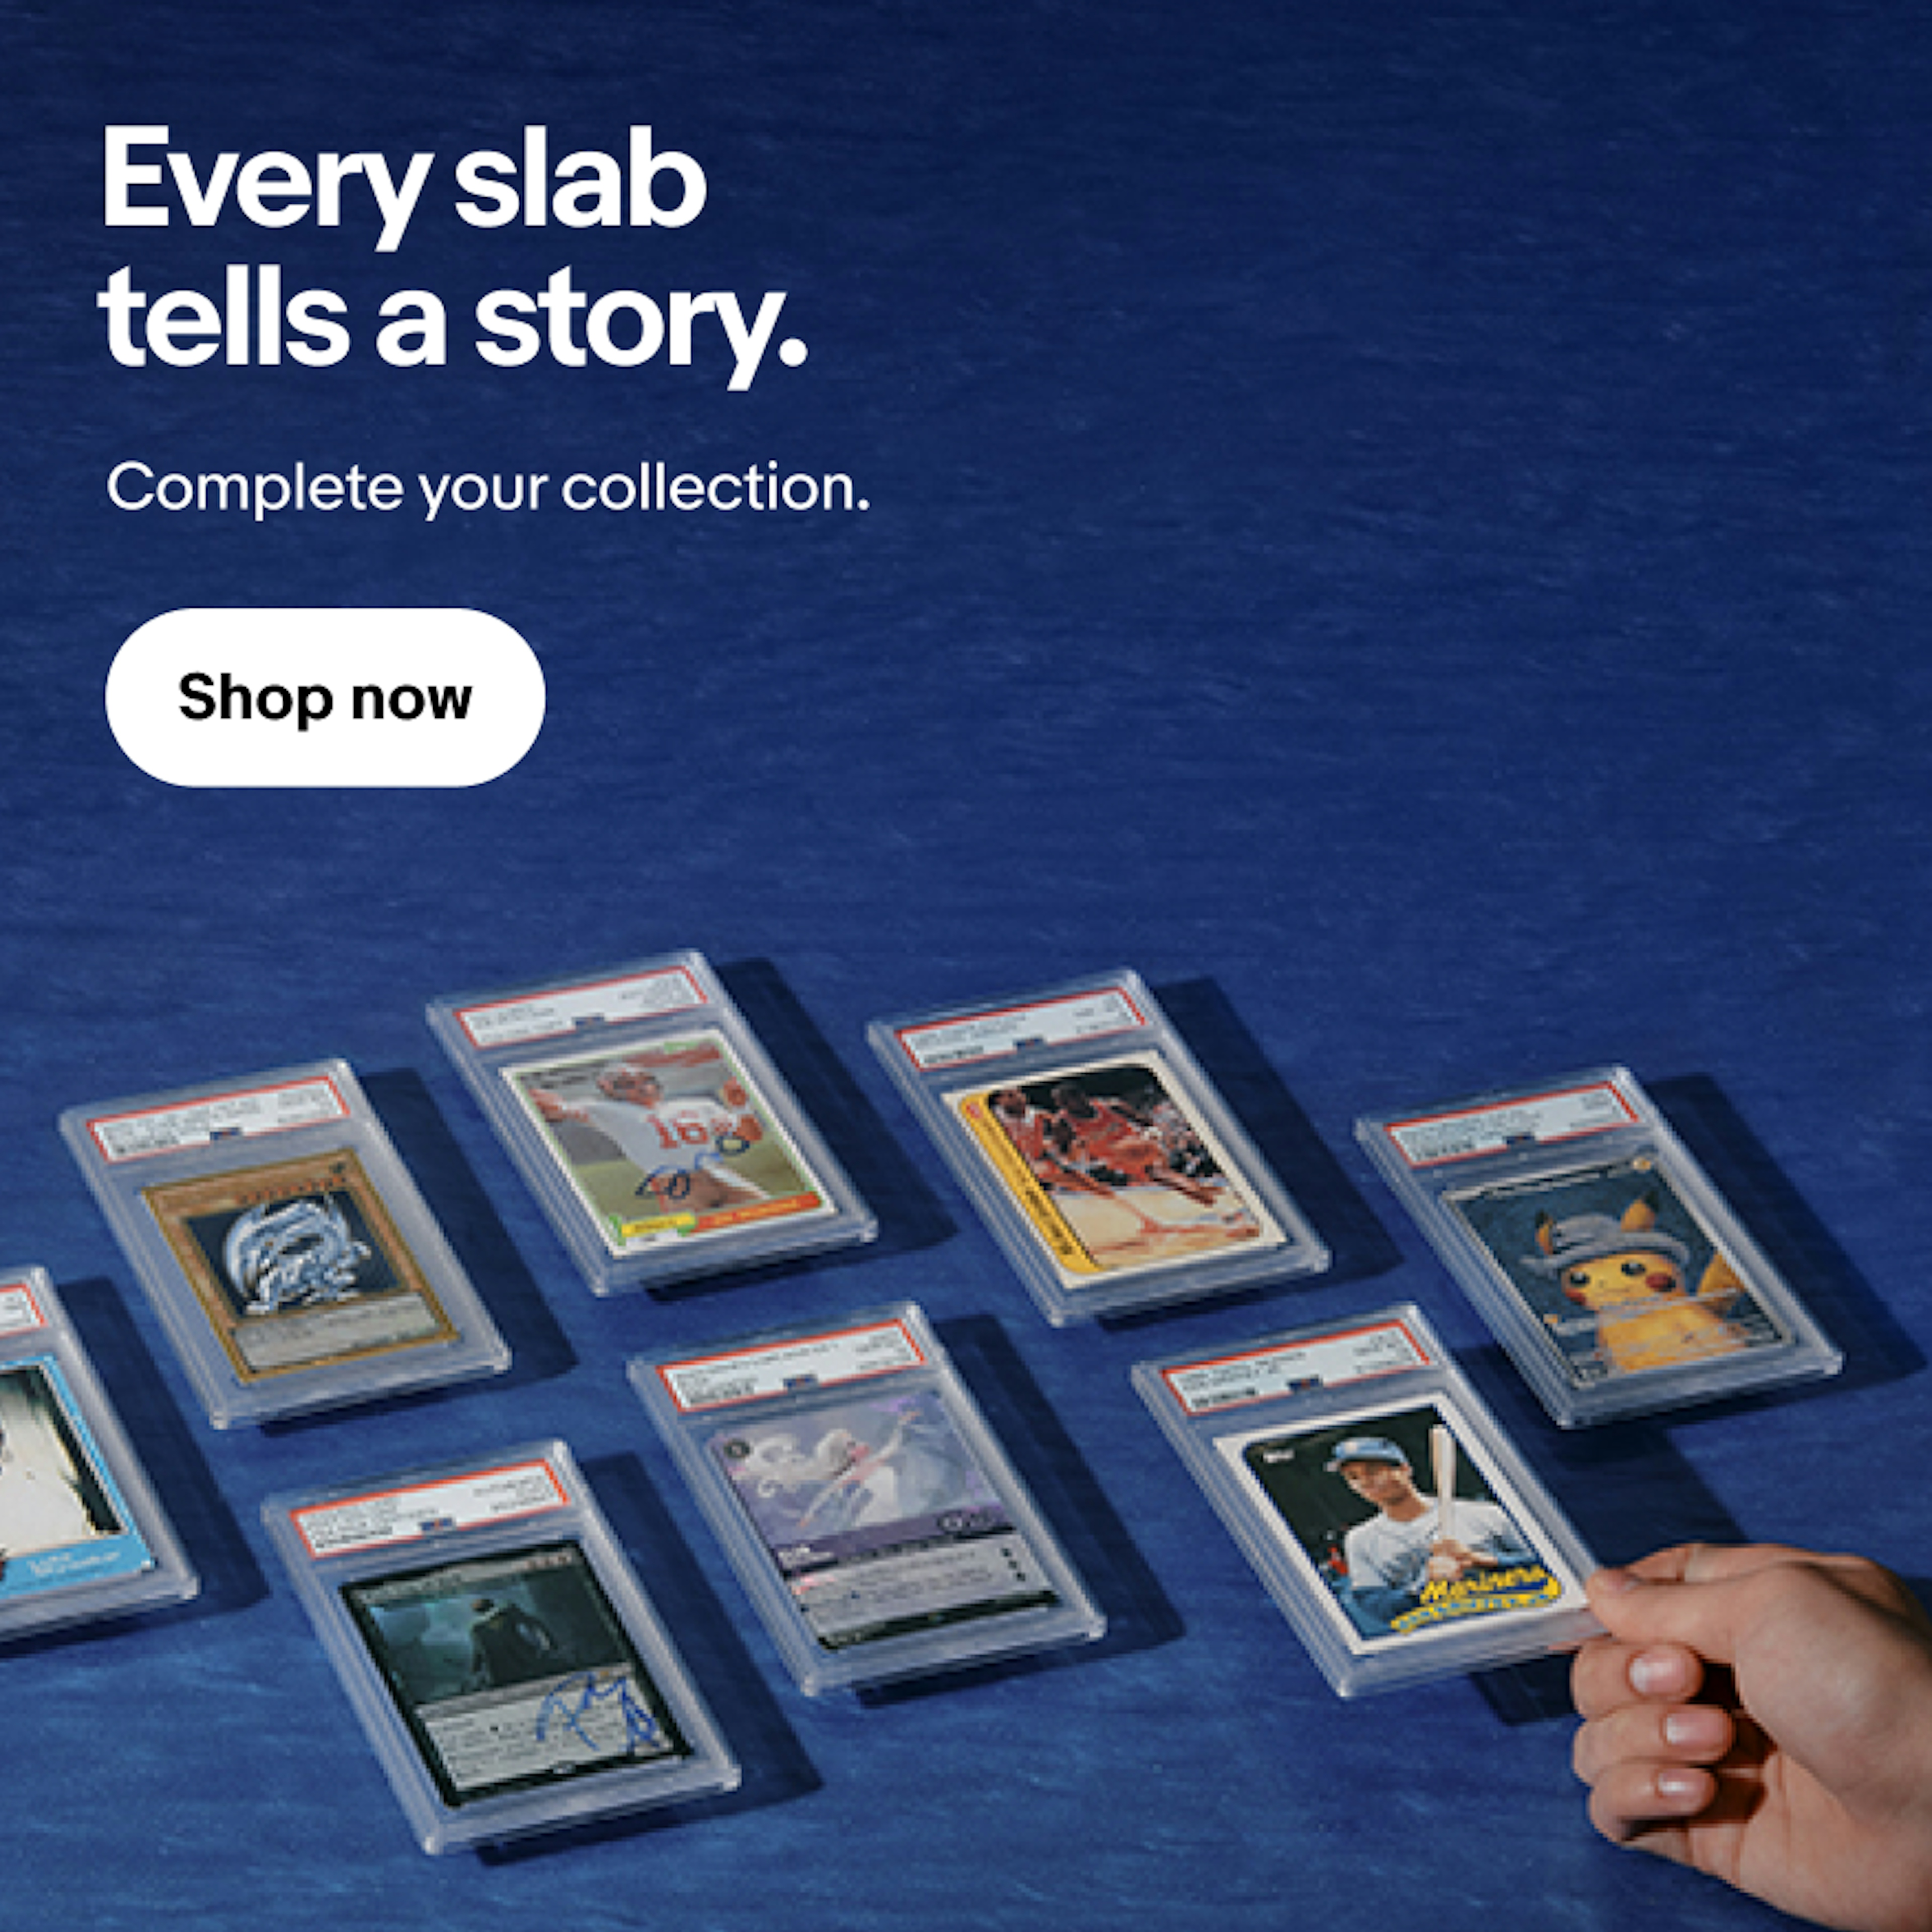 The image shows several graded trading cards arranged on a blue surface. The cards include various sports and collectible cards. A hand is holding one of the cards in the lower right corner. The text on the image reads, "Every slab tells a story. Complete your collection." There is also a "Shop now" button displayed on the left side of the image.